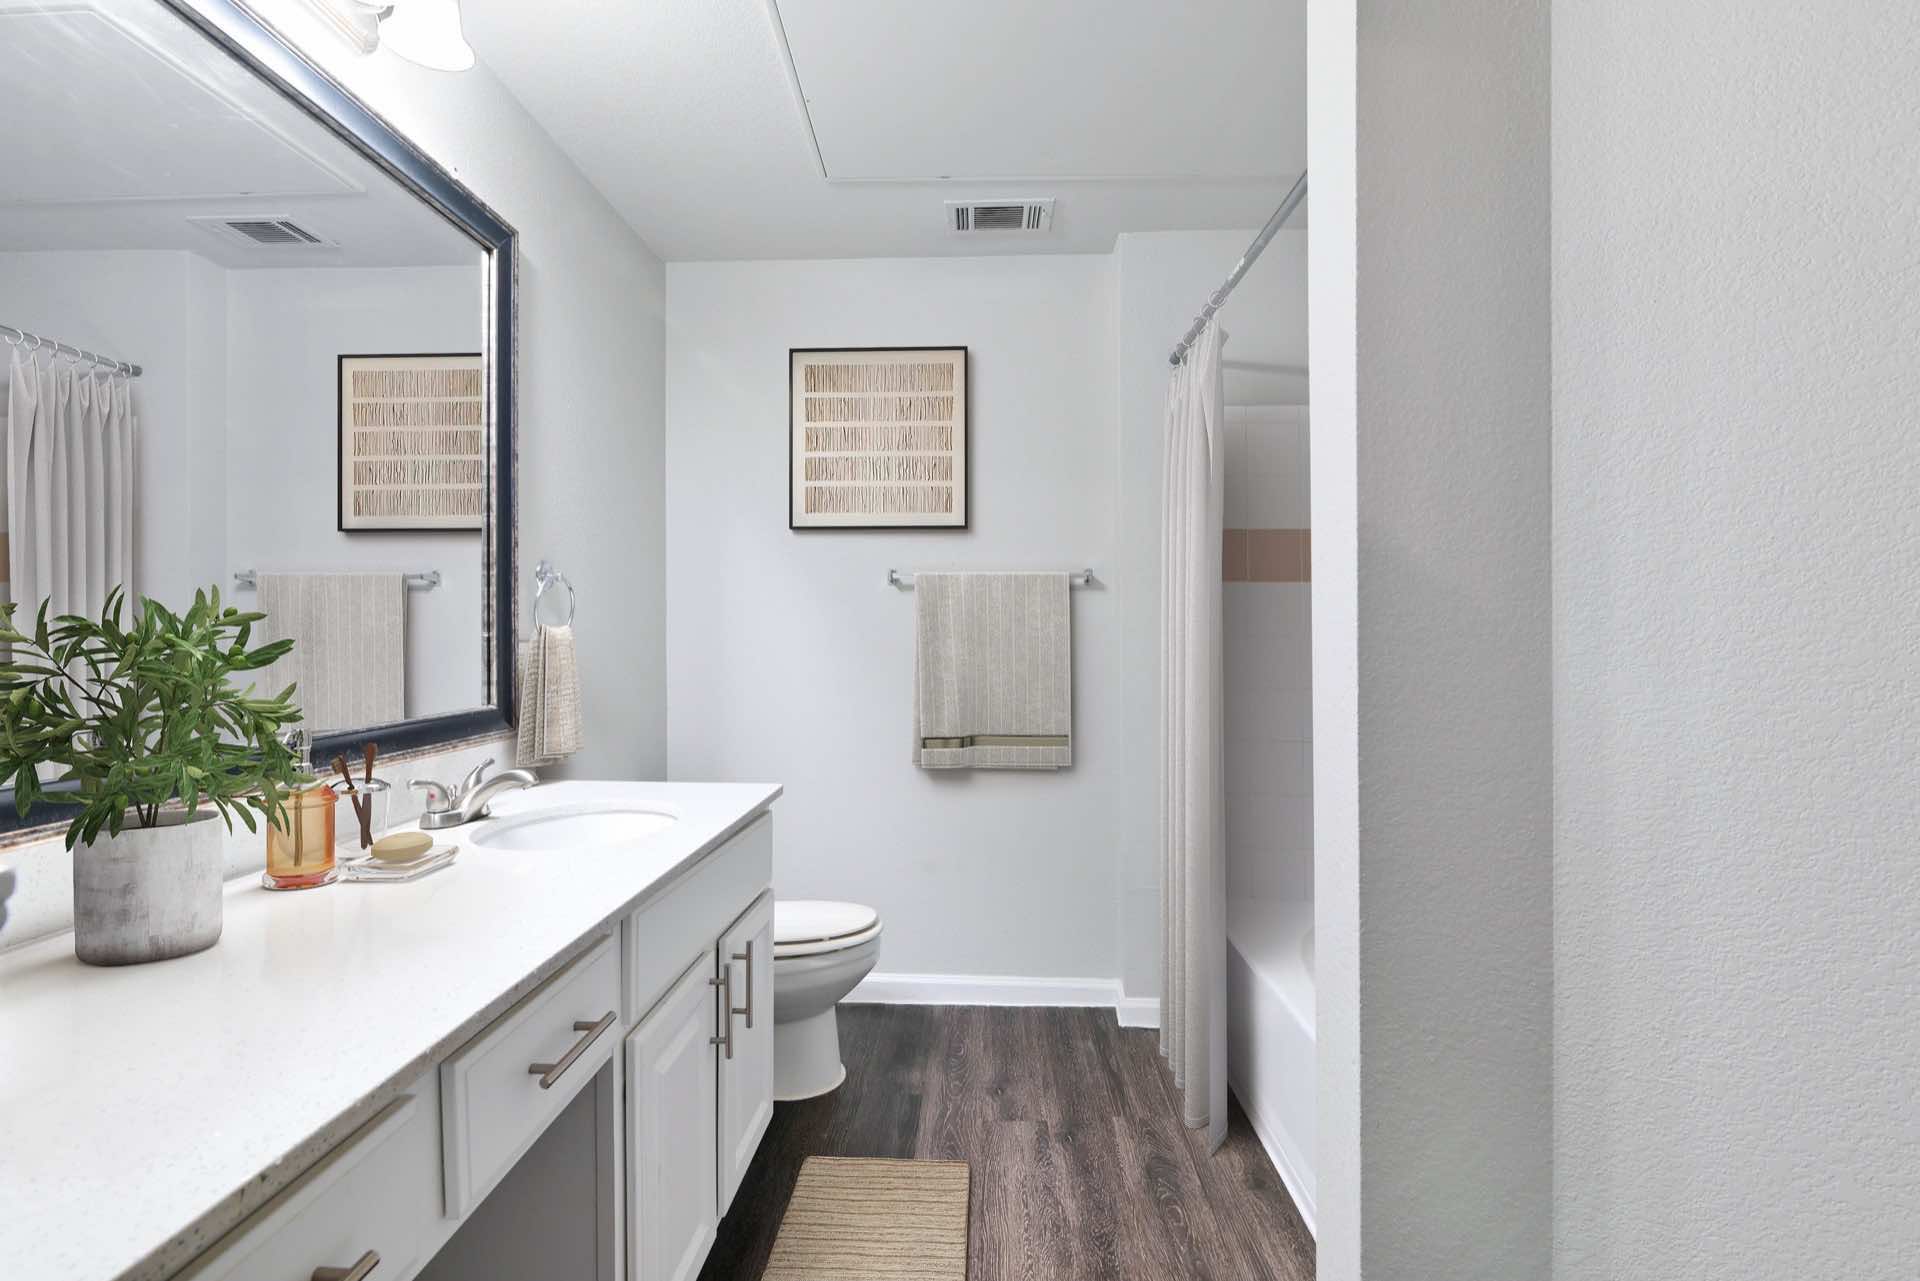 Bathroom with shower/tub combo and large bathroom counter